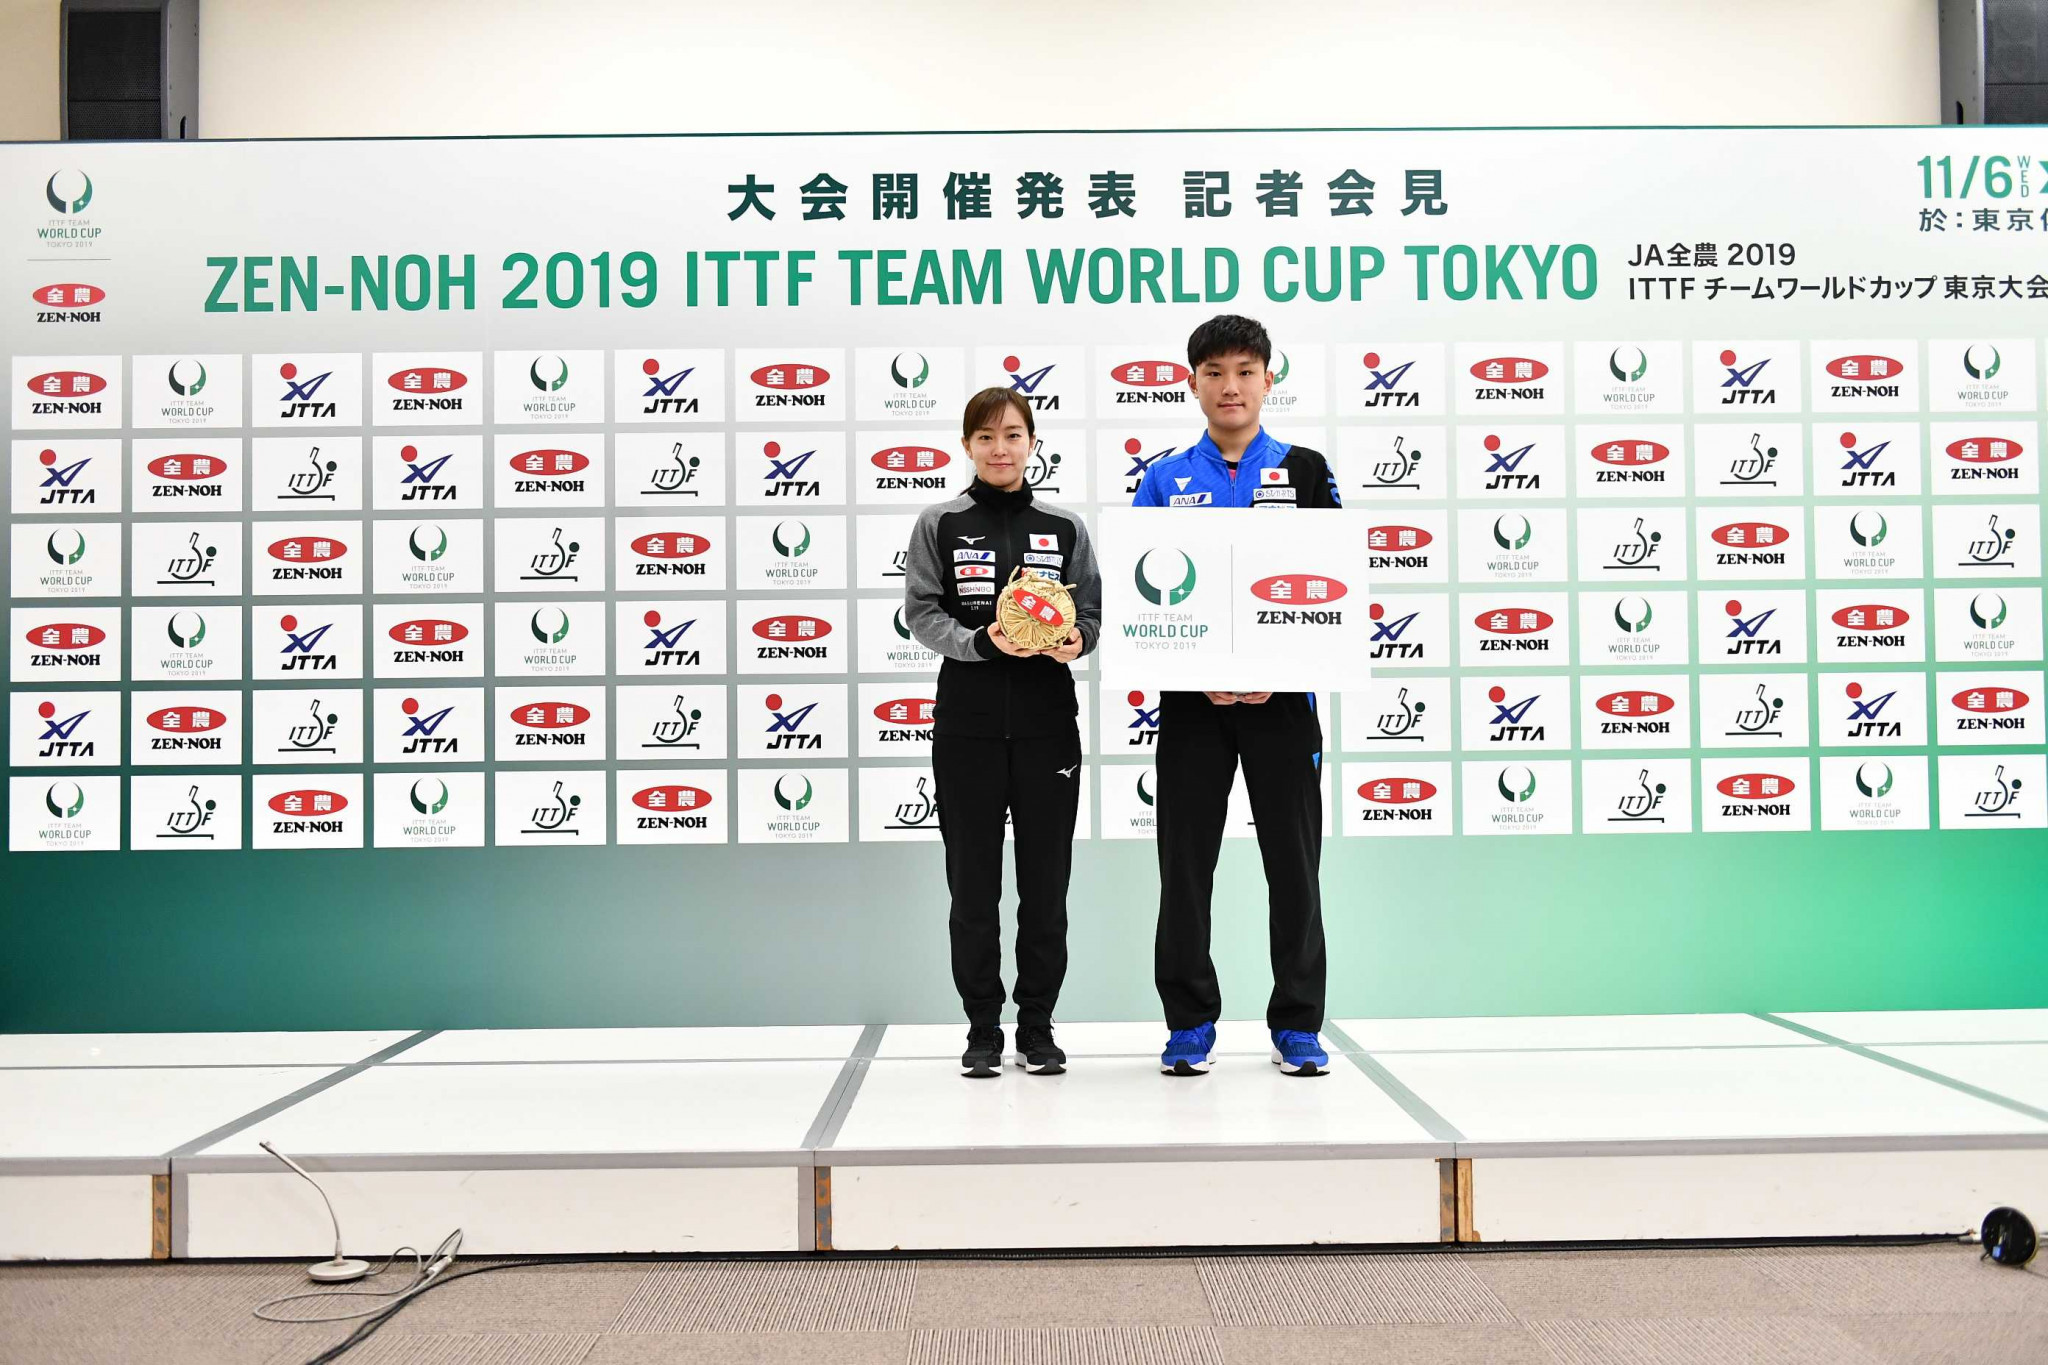 Tokyo is hosting this year's ITTF Team World Cup ©ITTF